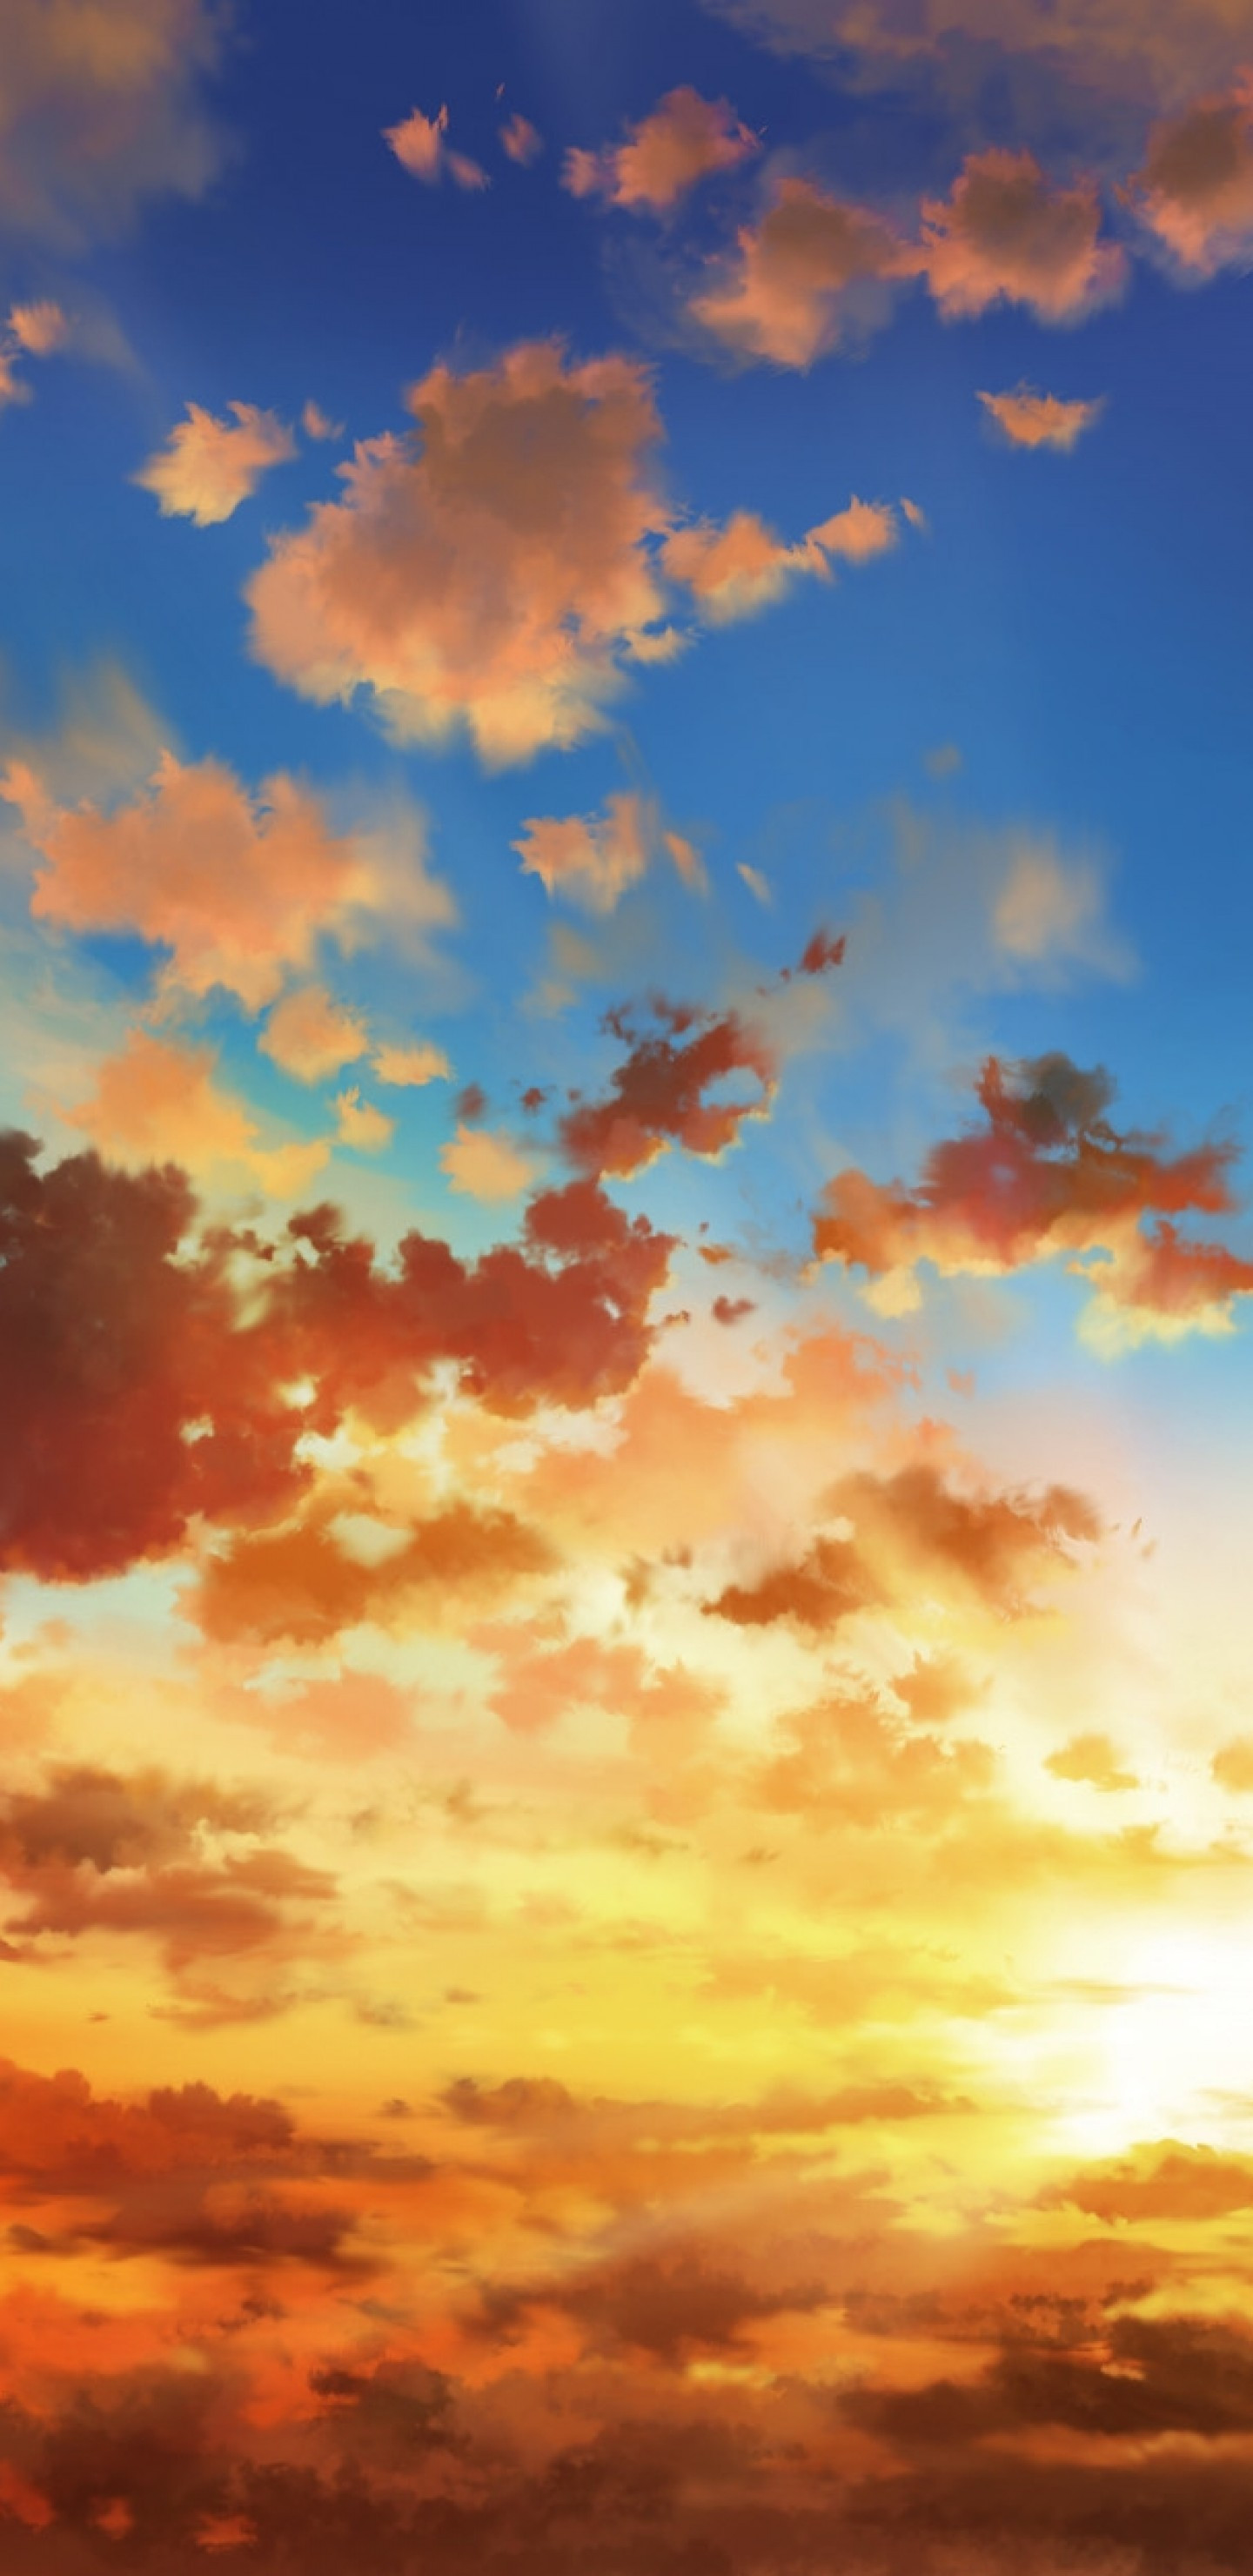 Download 1440x2960 Anime Landscape, Sunset, Clouds, Sky Wallpaper for Samsung Galaxy S Note S S8+, Google Pixel 3 XL